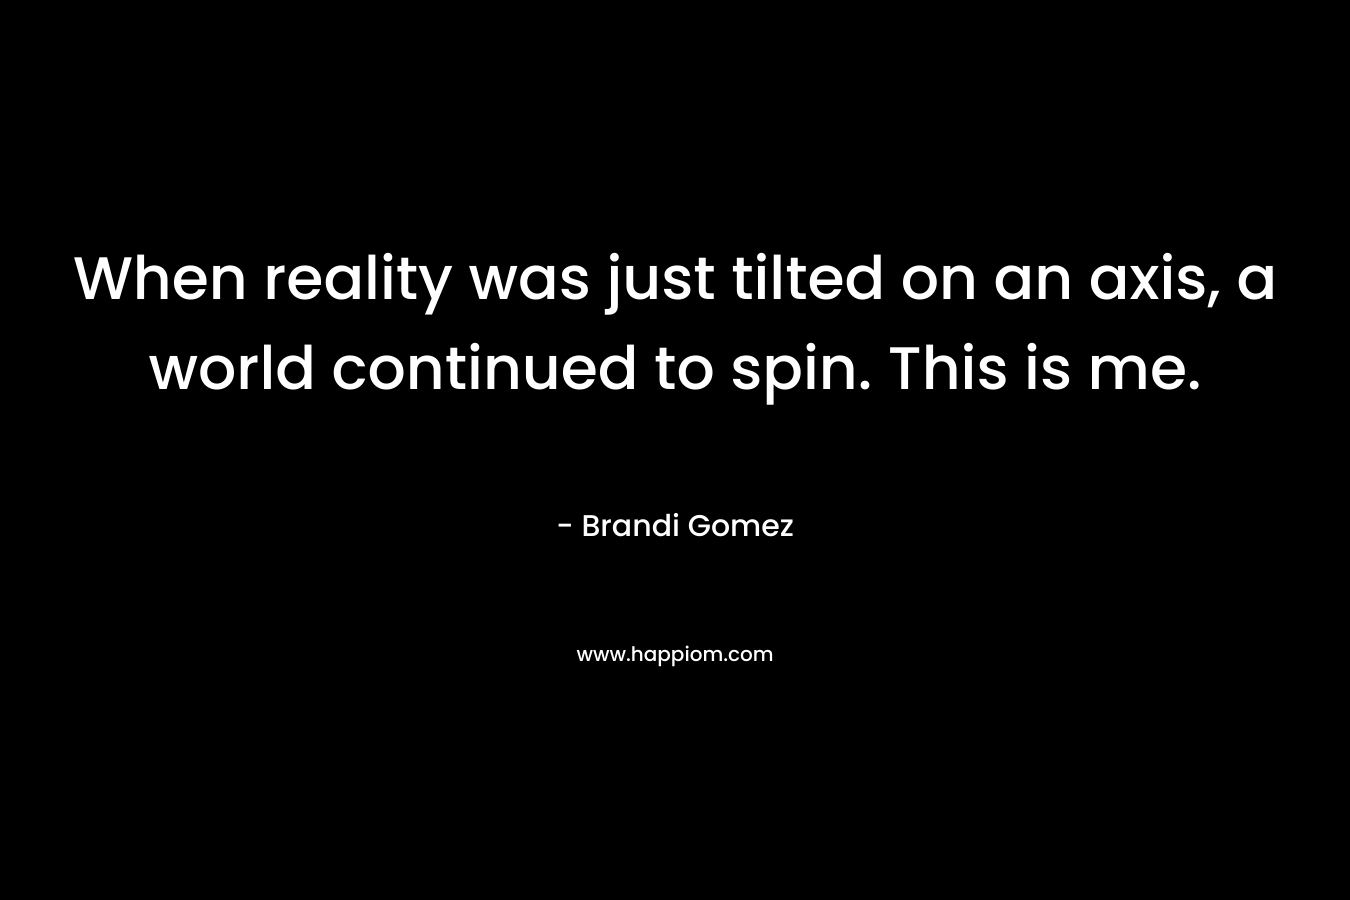 When reality was just tilted on an axis, a world continued to spin. This is me. – Brandi Gomez